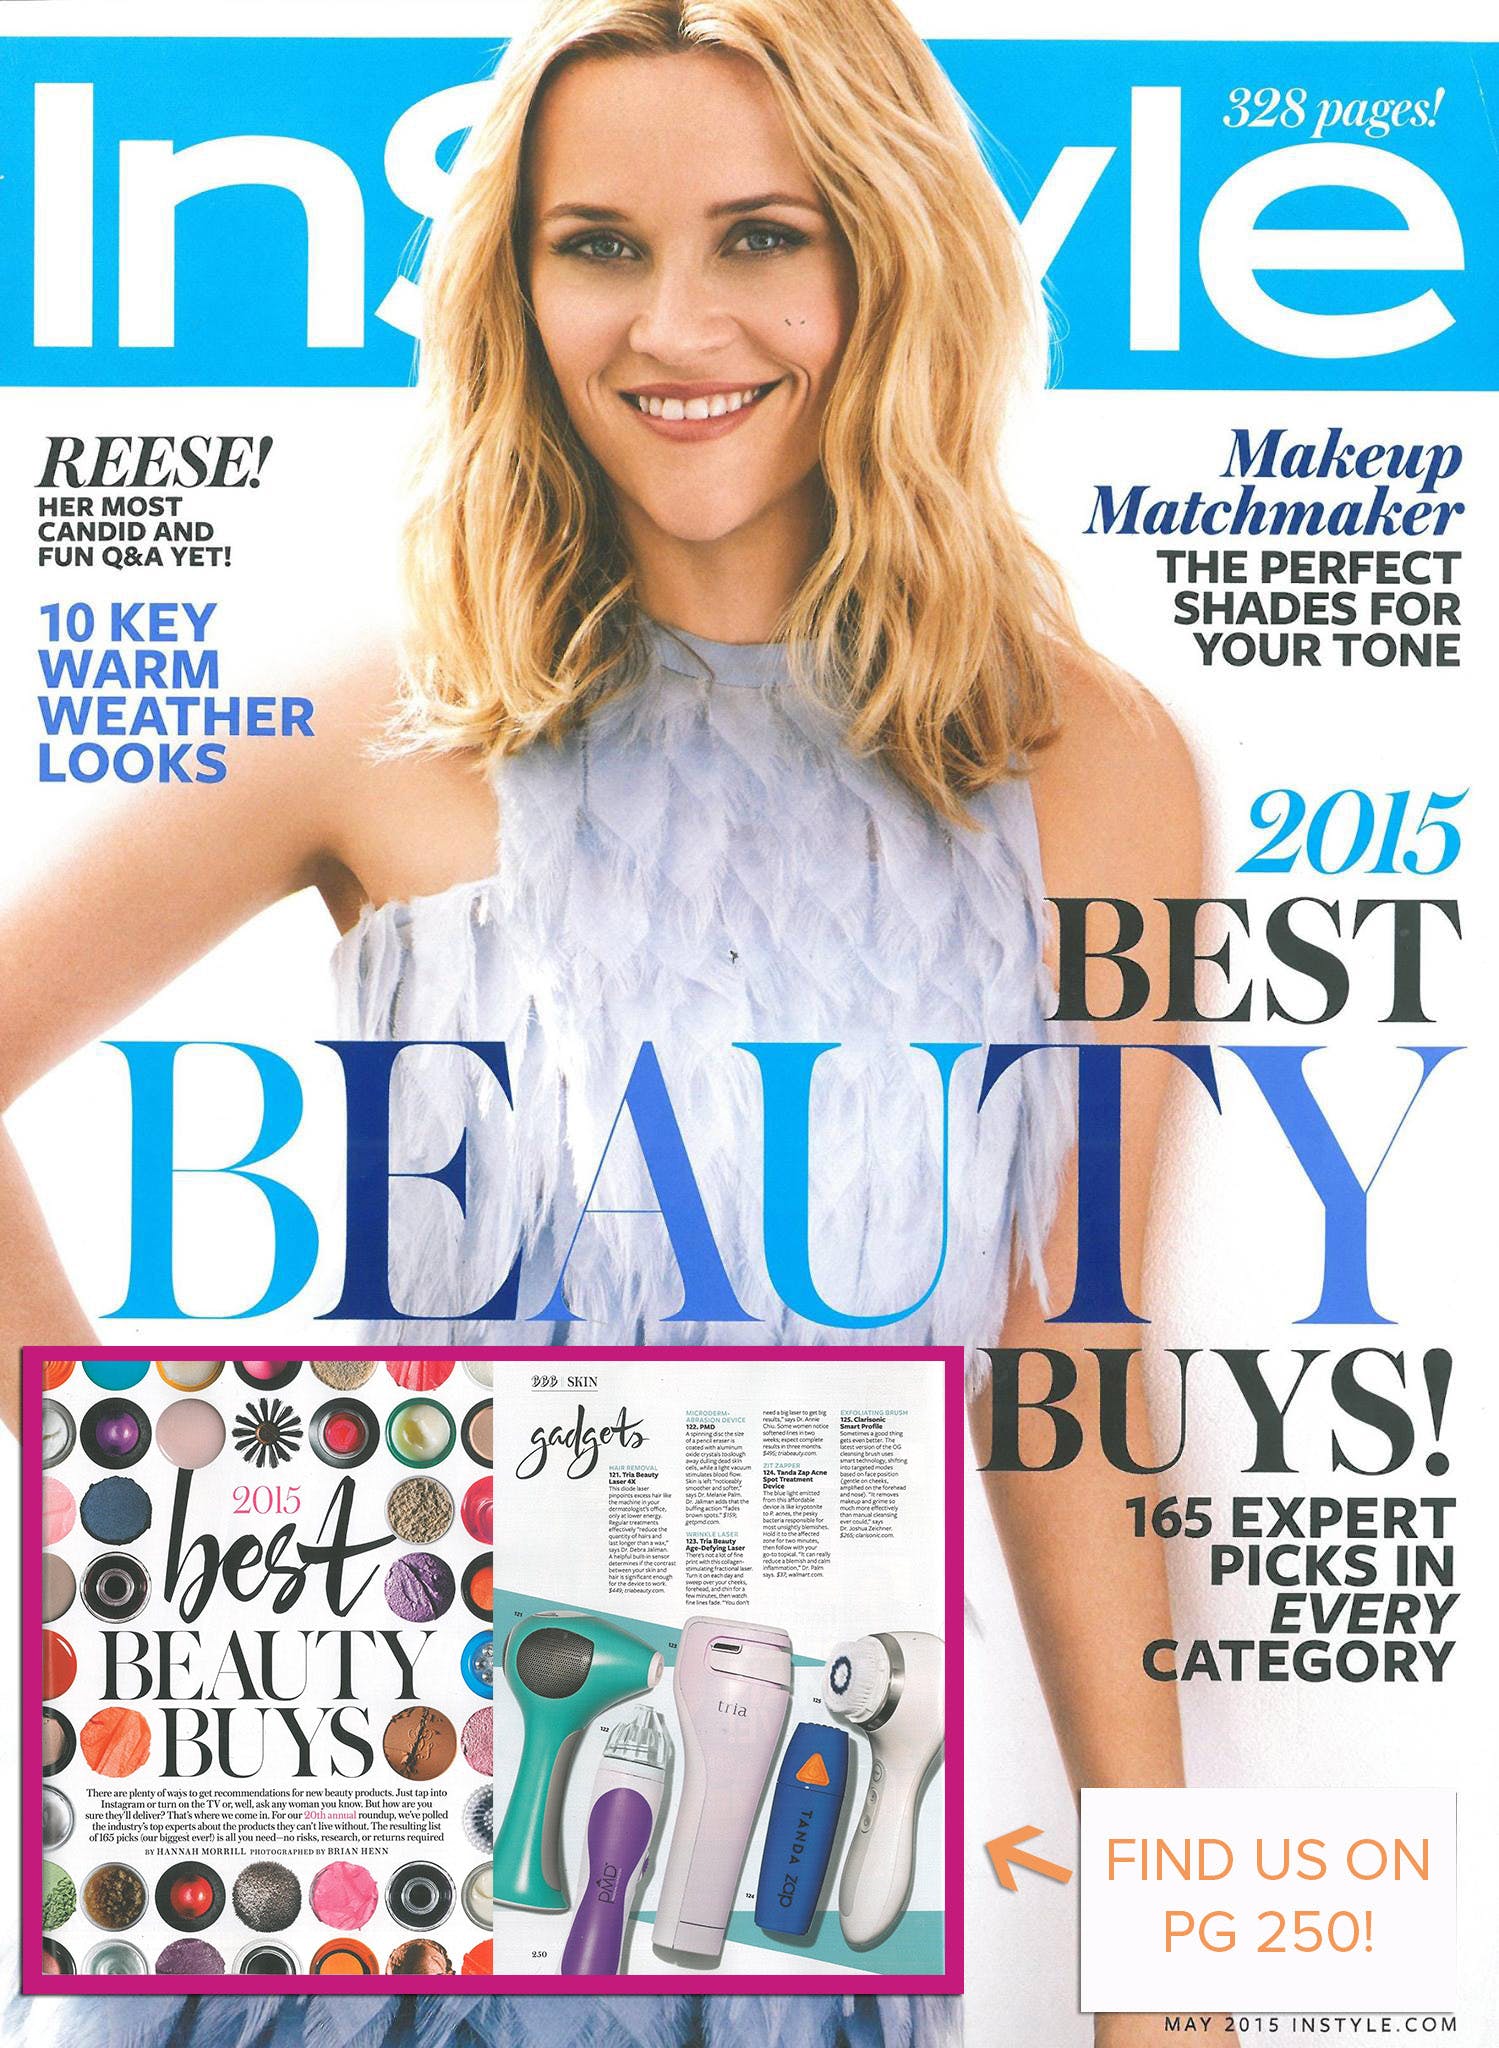 Instyle Magazine’s 2015 Best Beauty Buys: PMD Personal Microderm